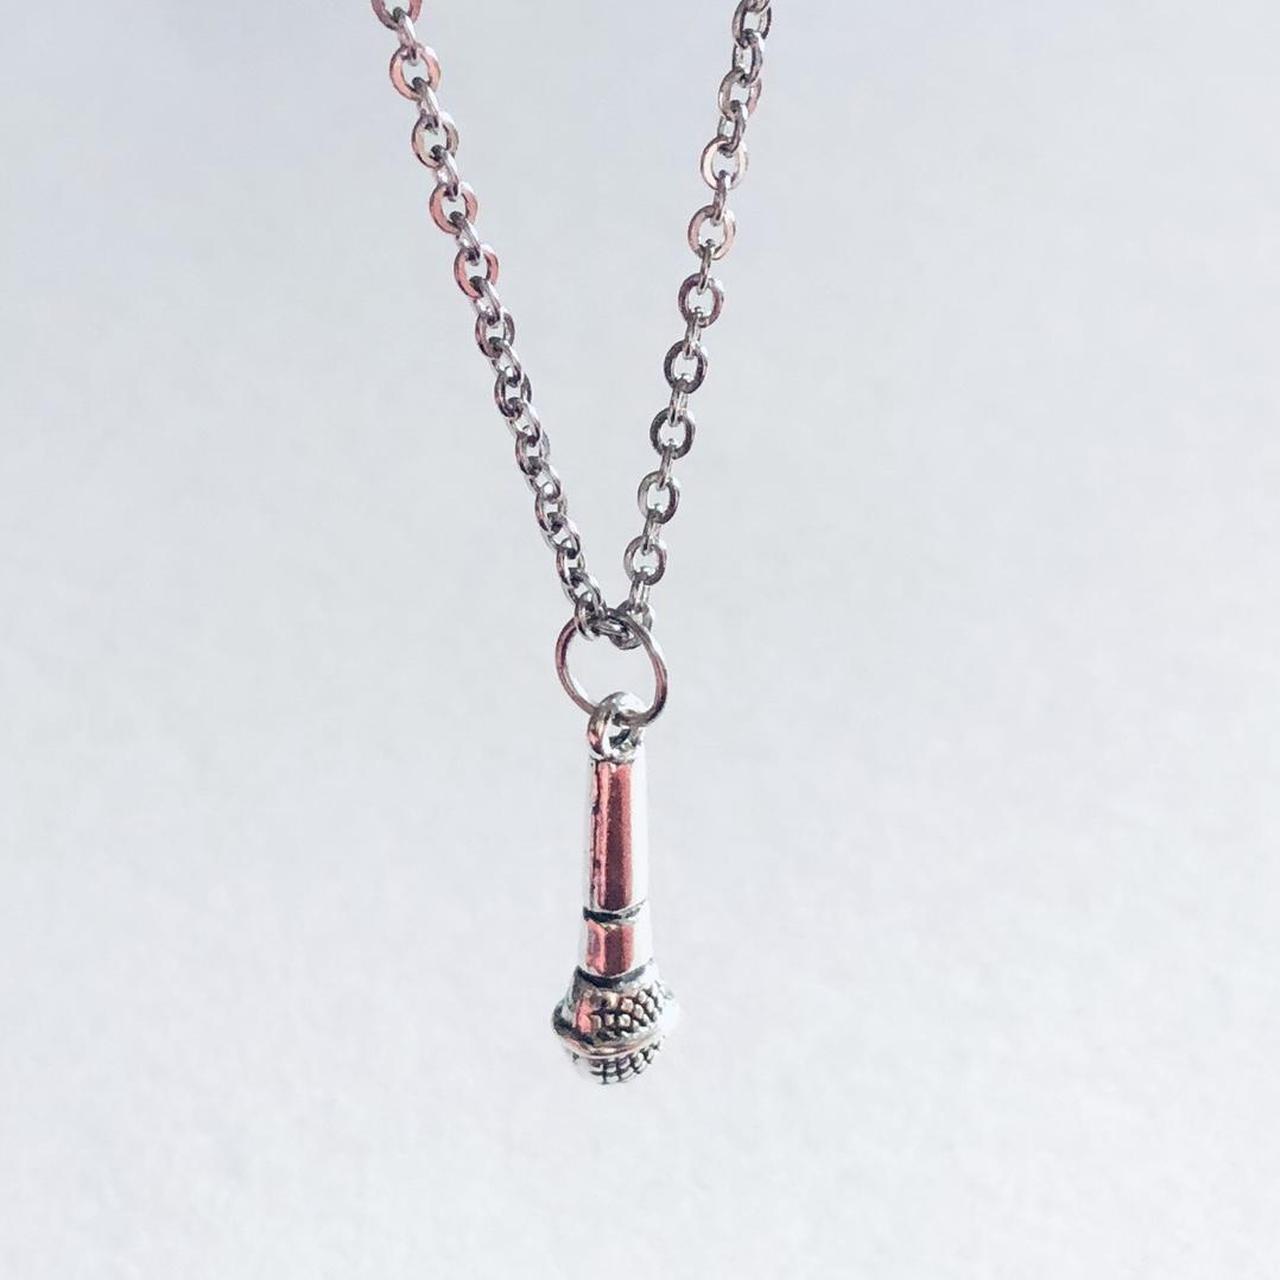 Product Image 2 - Silver microphone necklace, hip hop